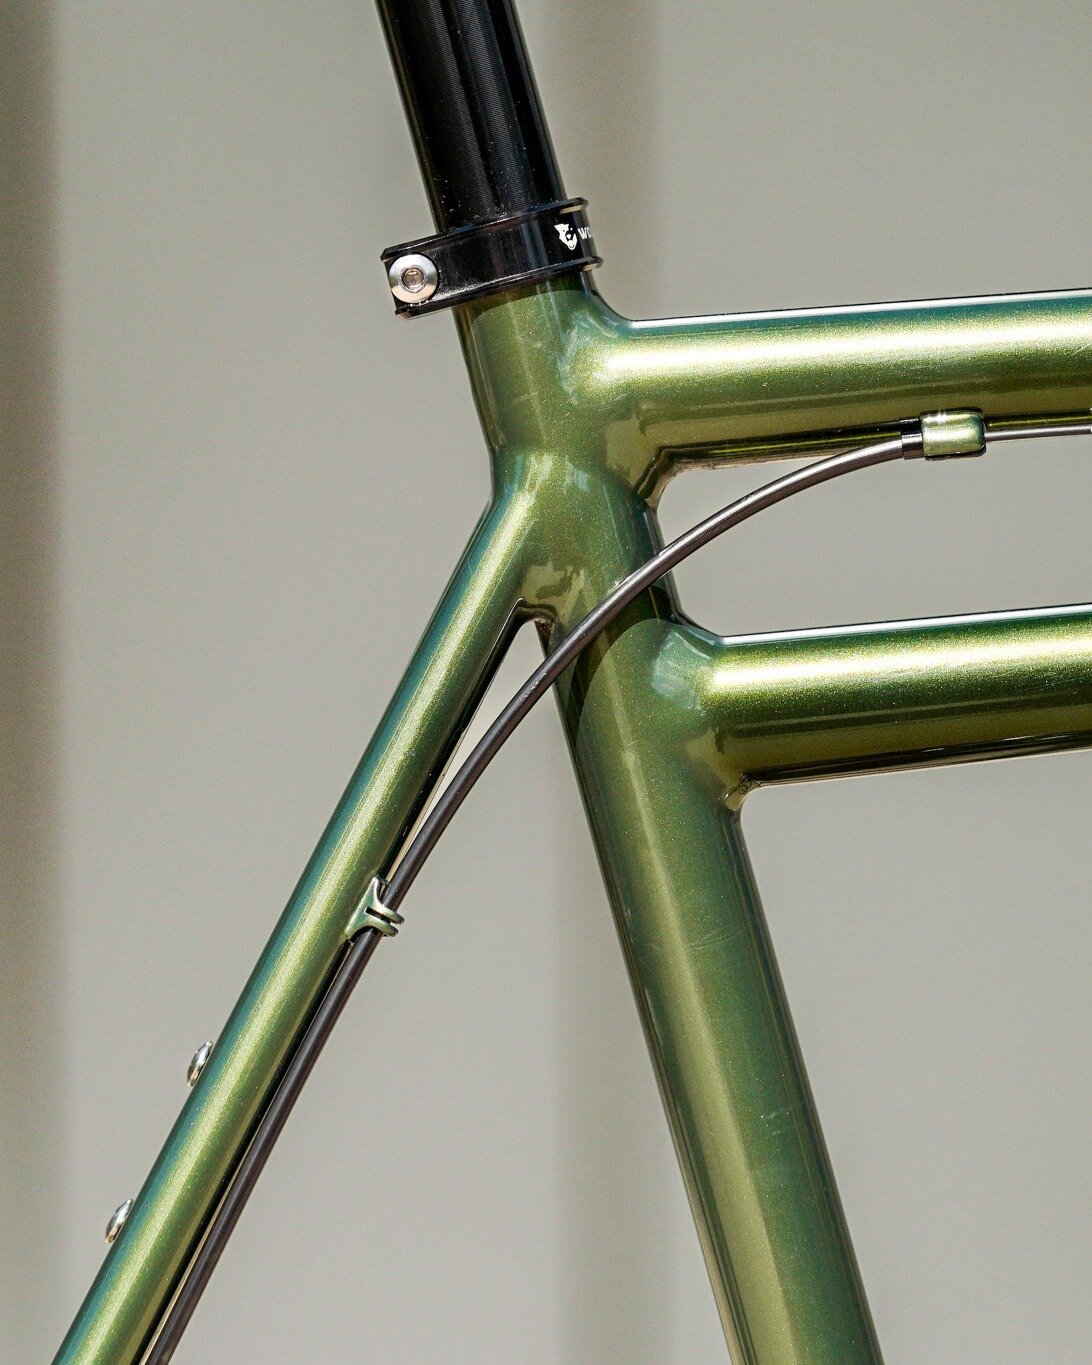 The Battleship

This bike build is like nothing you have ever seen before, you seen when you buy a custom bike most people will end up with the standard triangle shape, unlike most bike frames. 

Rob Benson from Tempest Bicycles has thought outside o